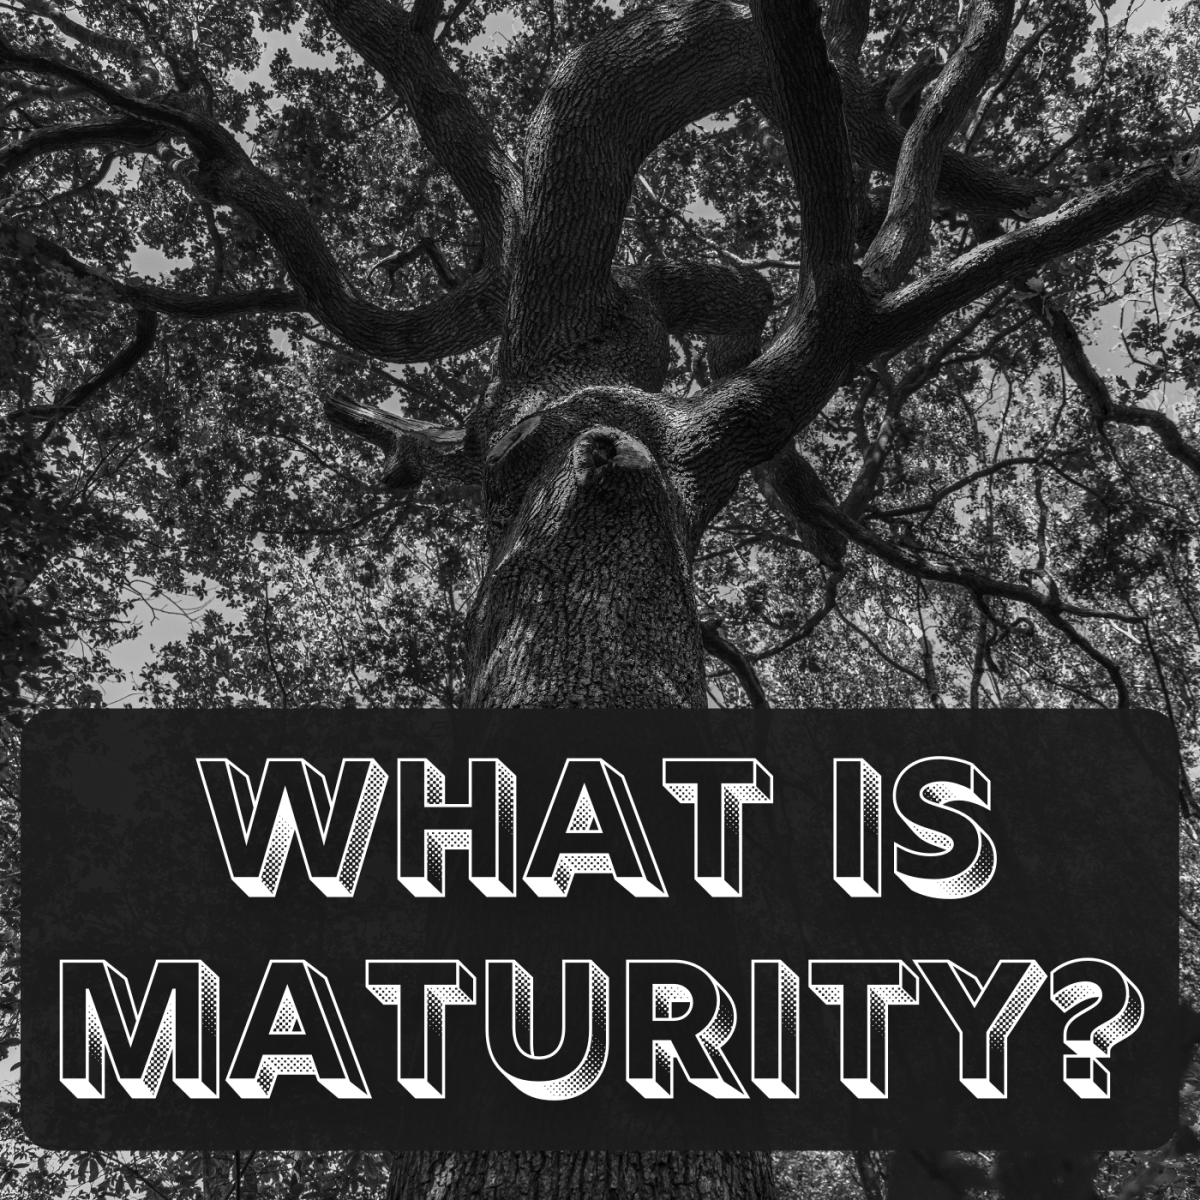 What does it mean to be truly mature?